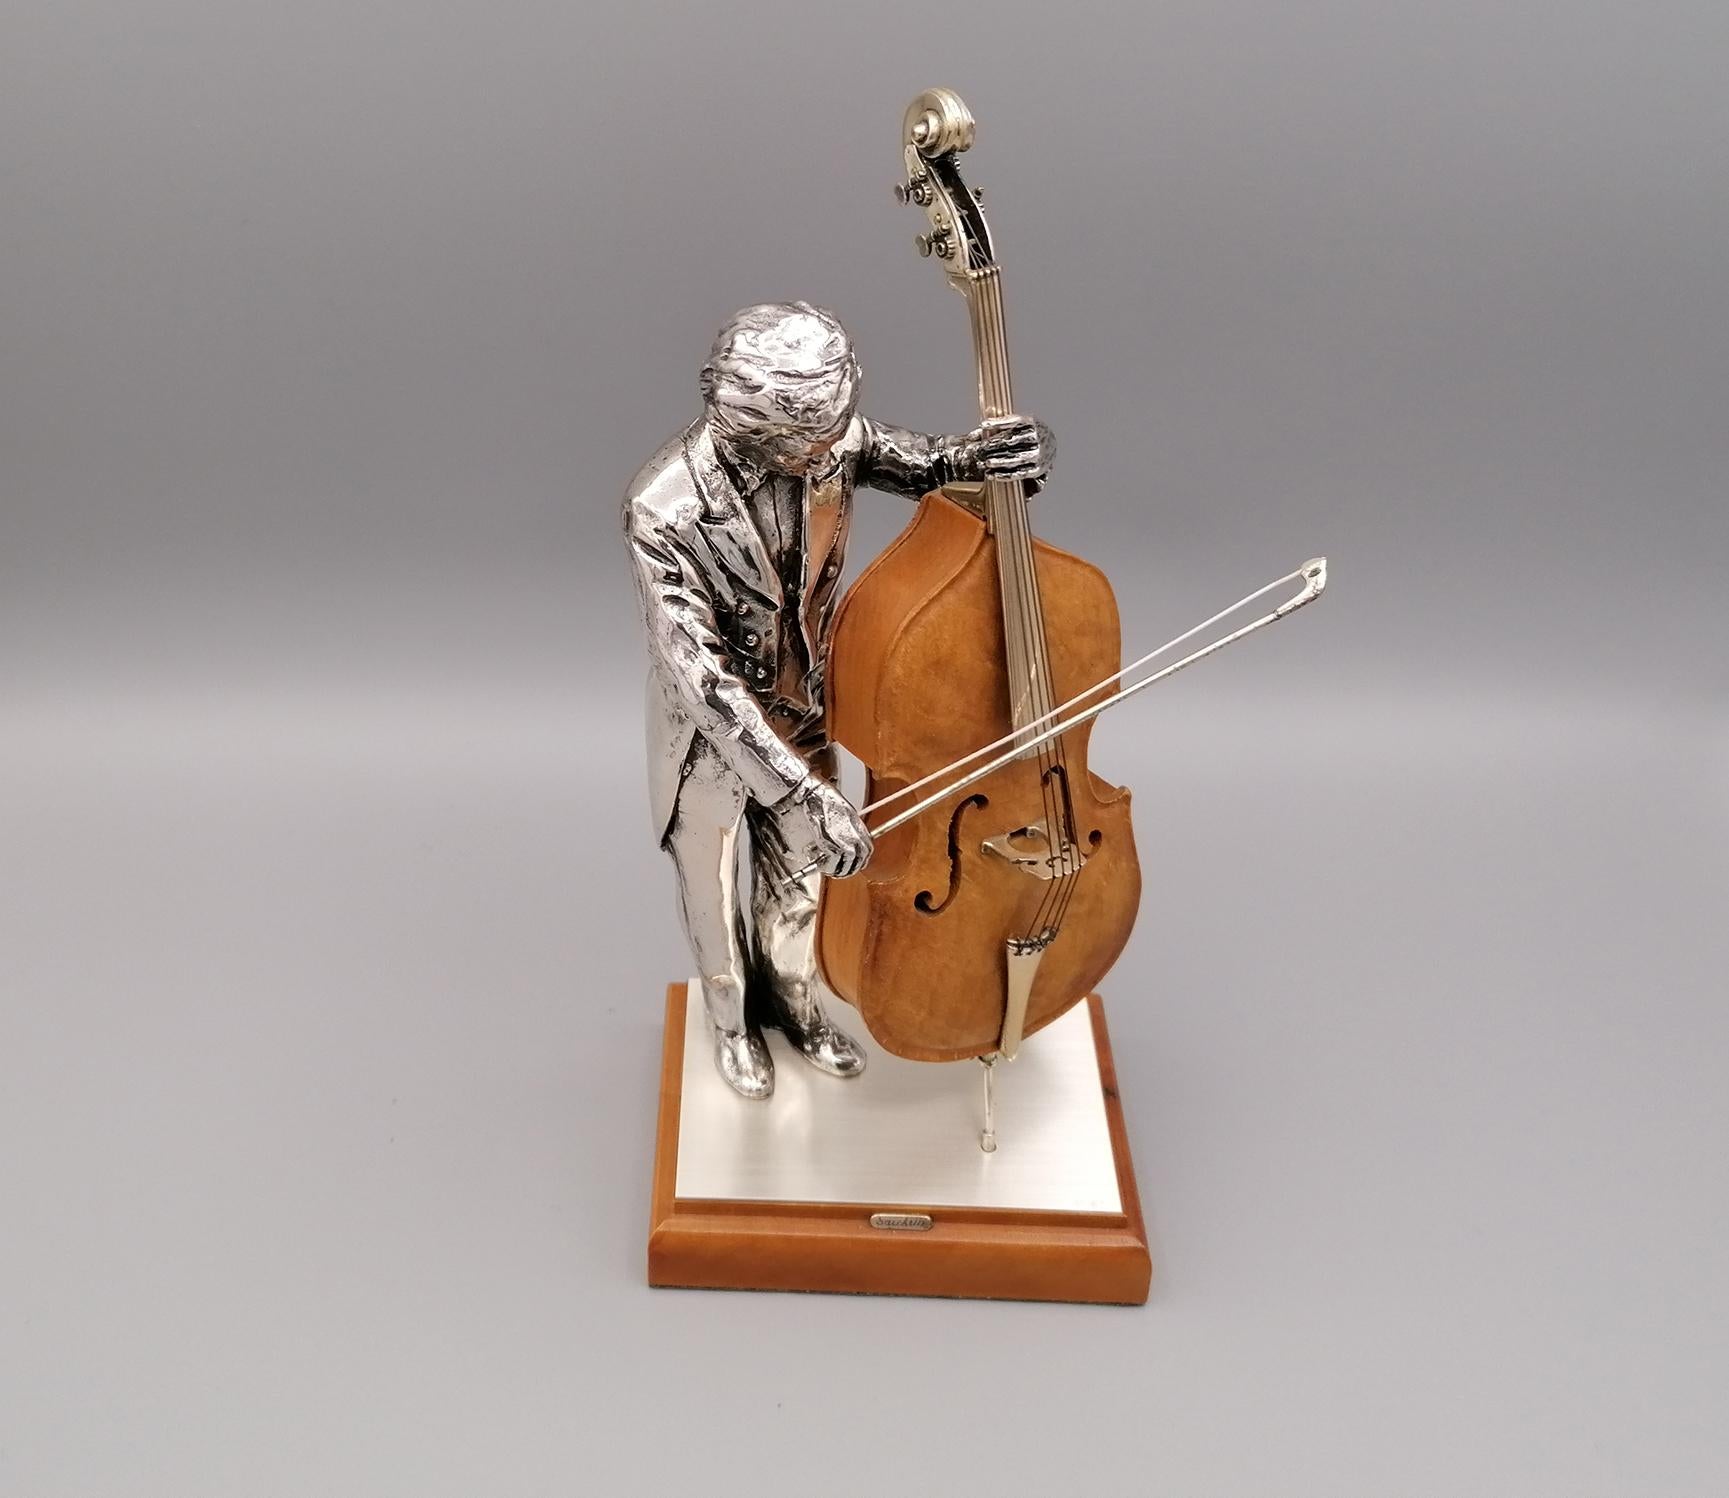 Double bass player in 800 solid silver. The double bass is in briar with silver details. 
The double bass bow is in silver.
The player and the double bass are positioned on a wooden base covered with a silver sheet at the top.
Italian silverware,